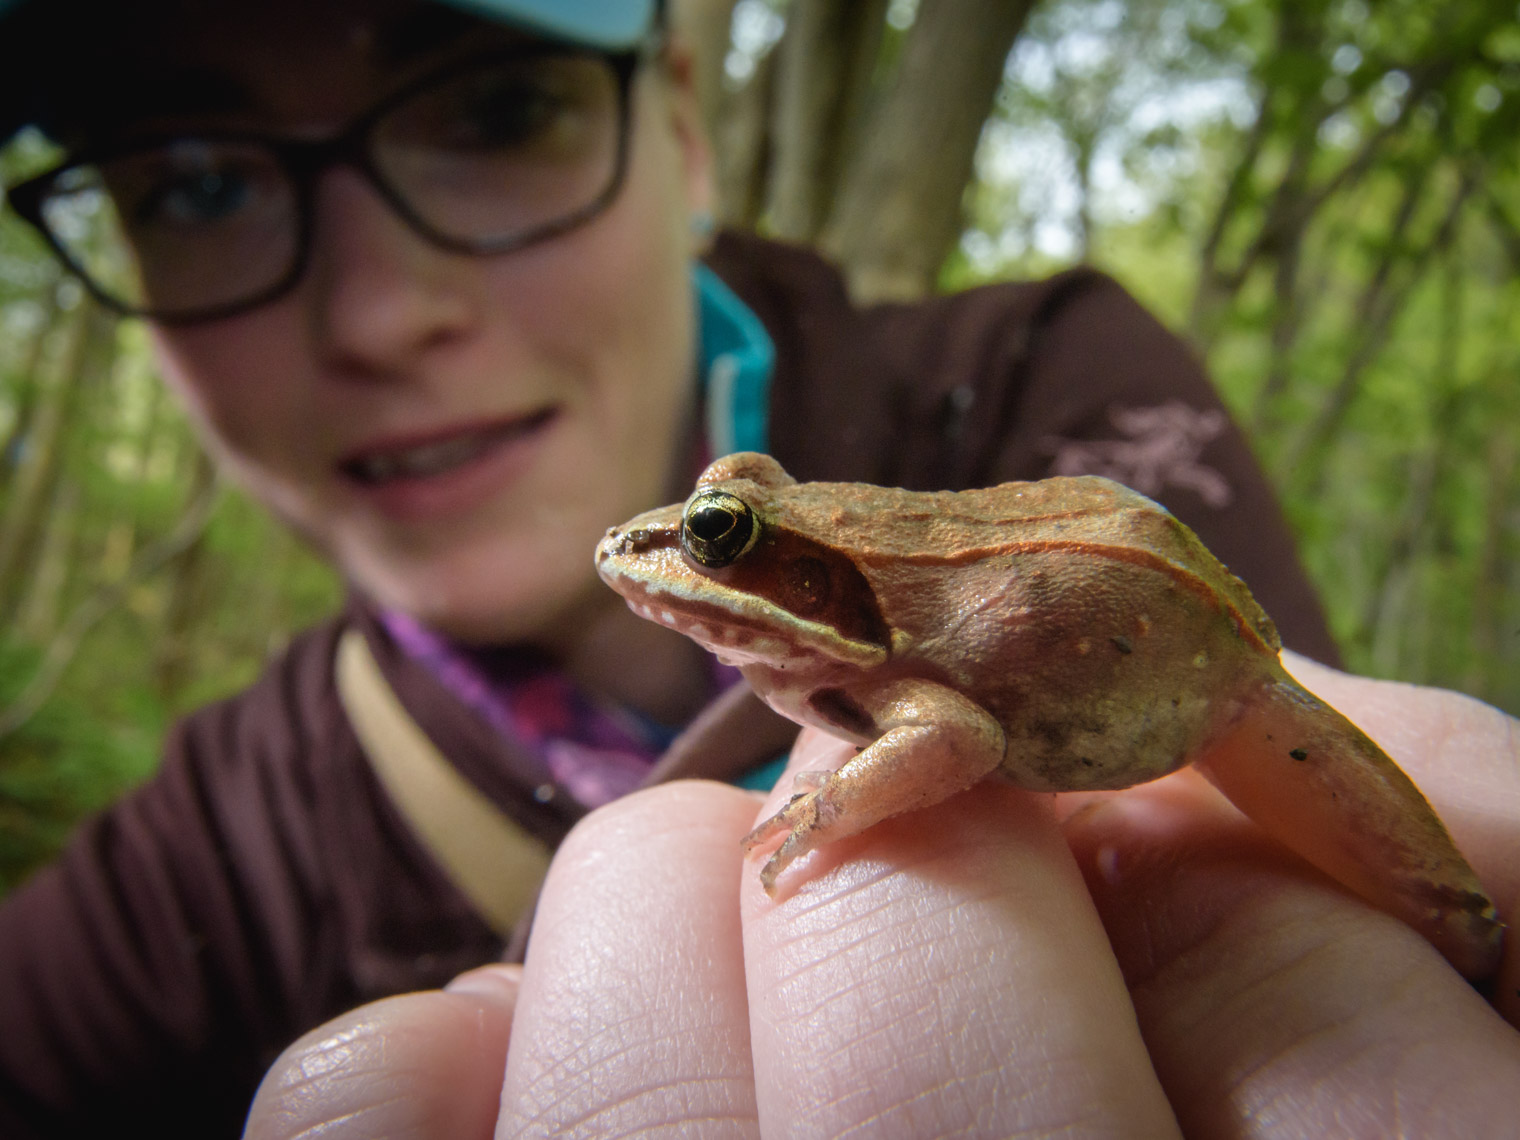 Ontario Nature conservation technician with a wood frog at one of their nature reserves